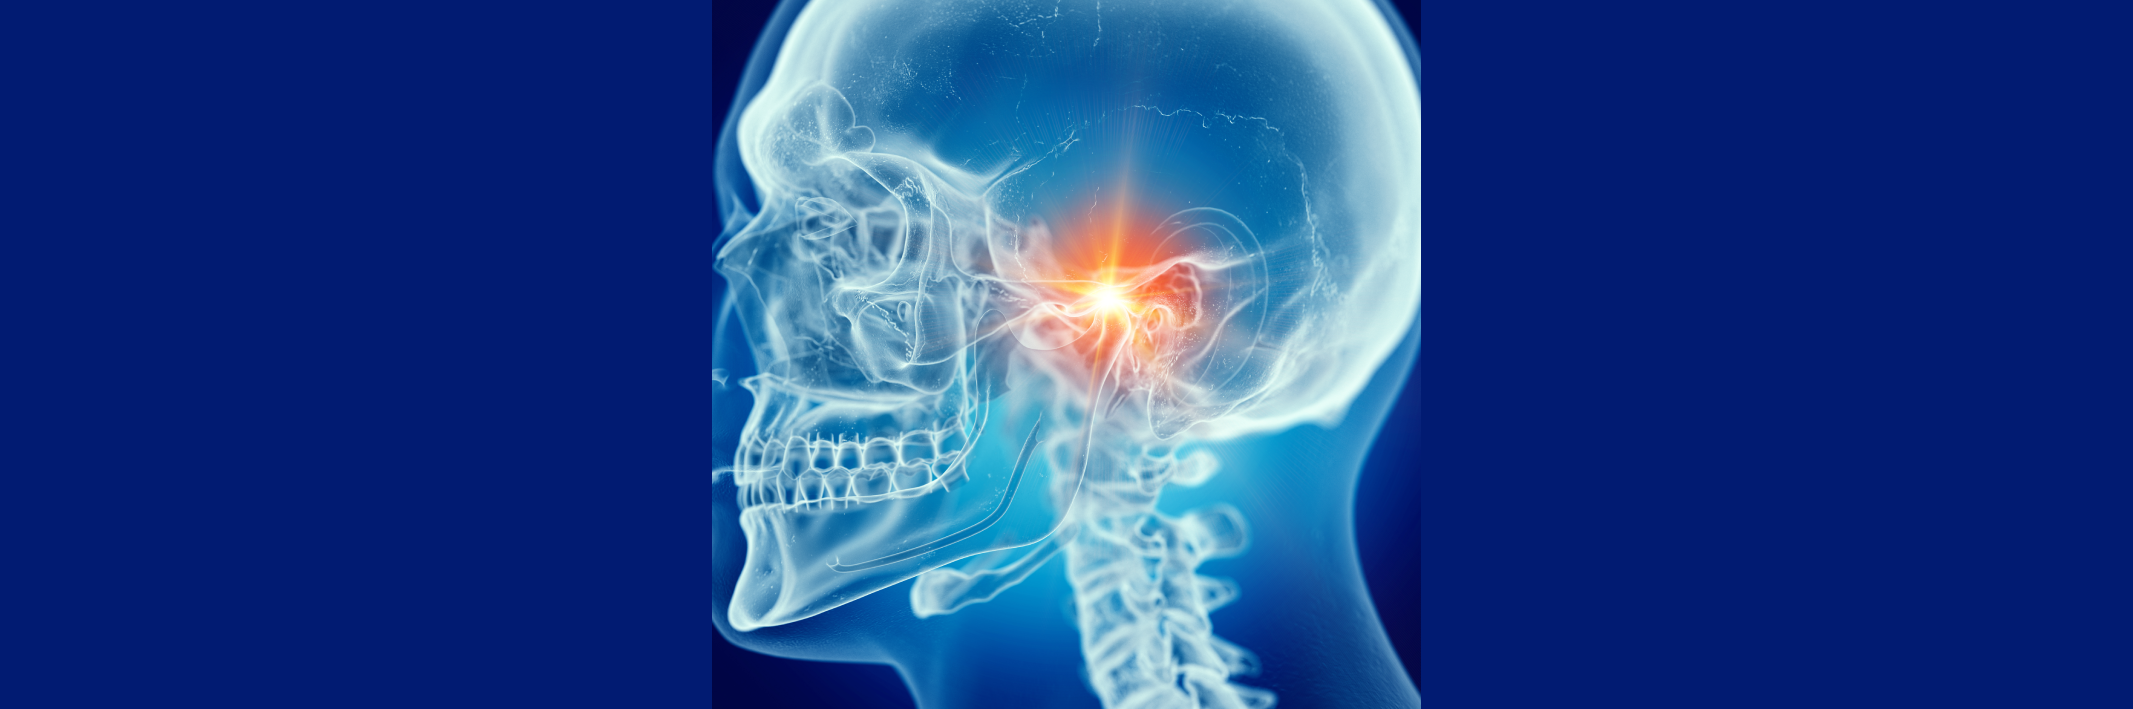 Jaw Popping: What Causes It? What Can You Do?